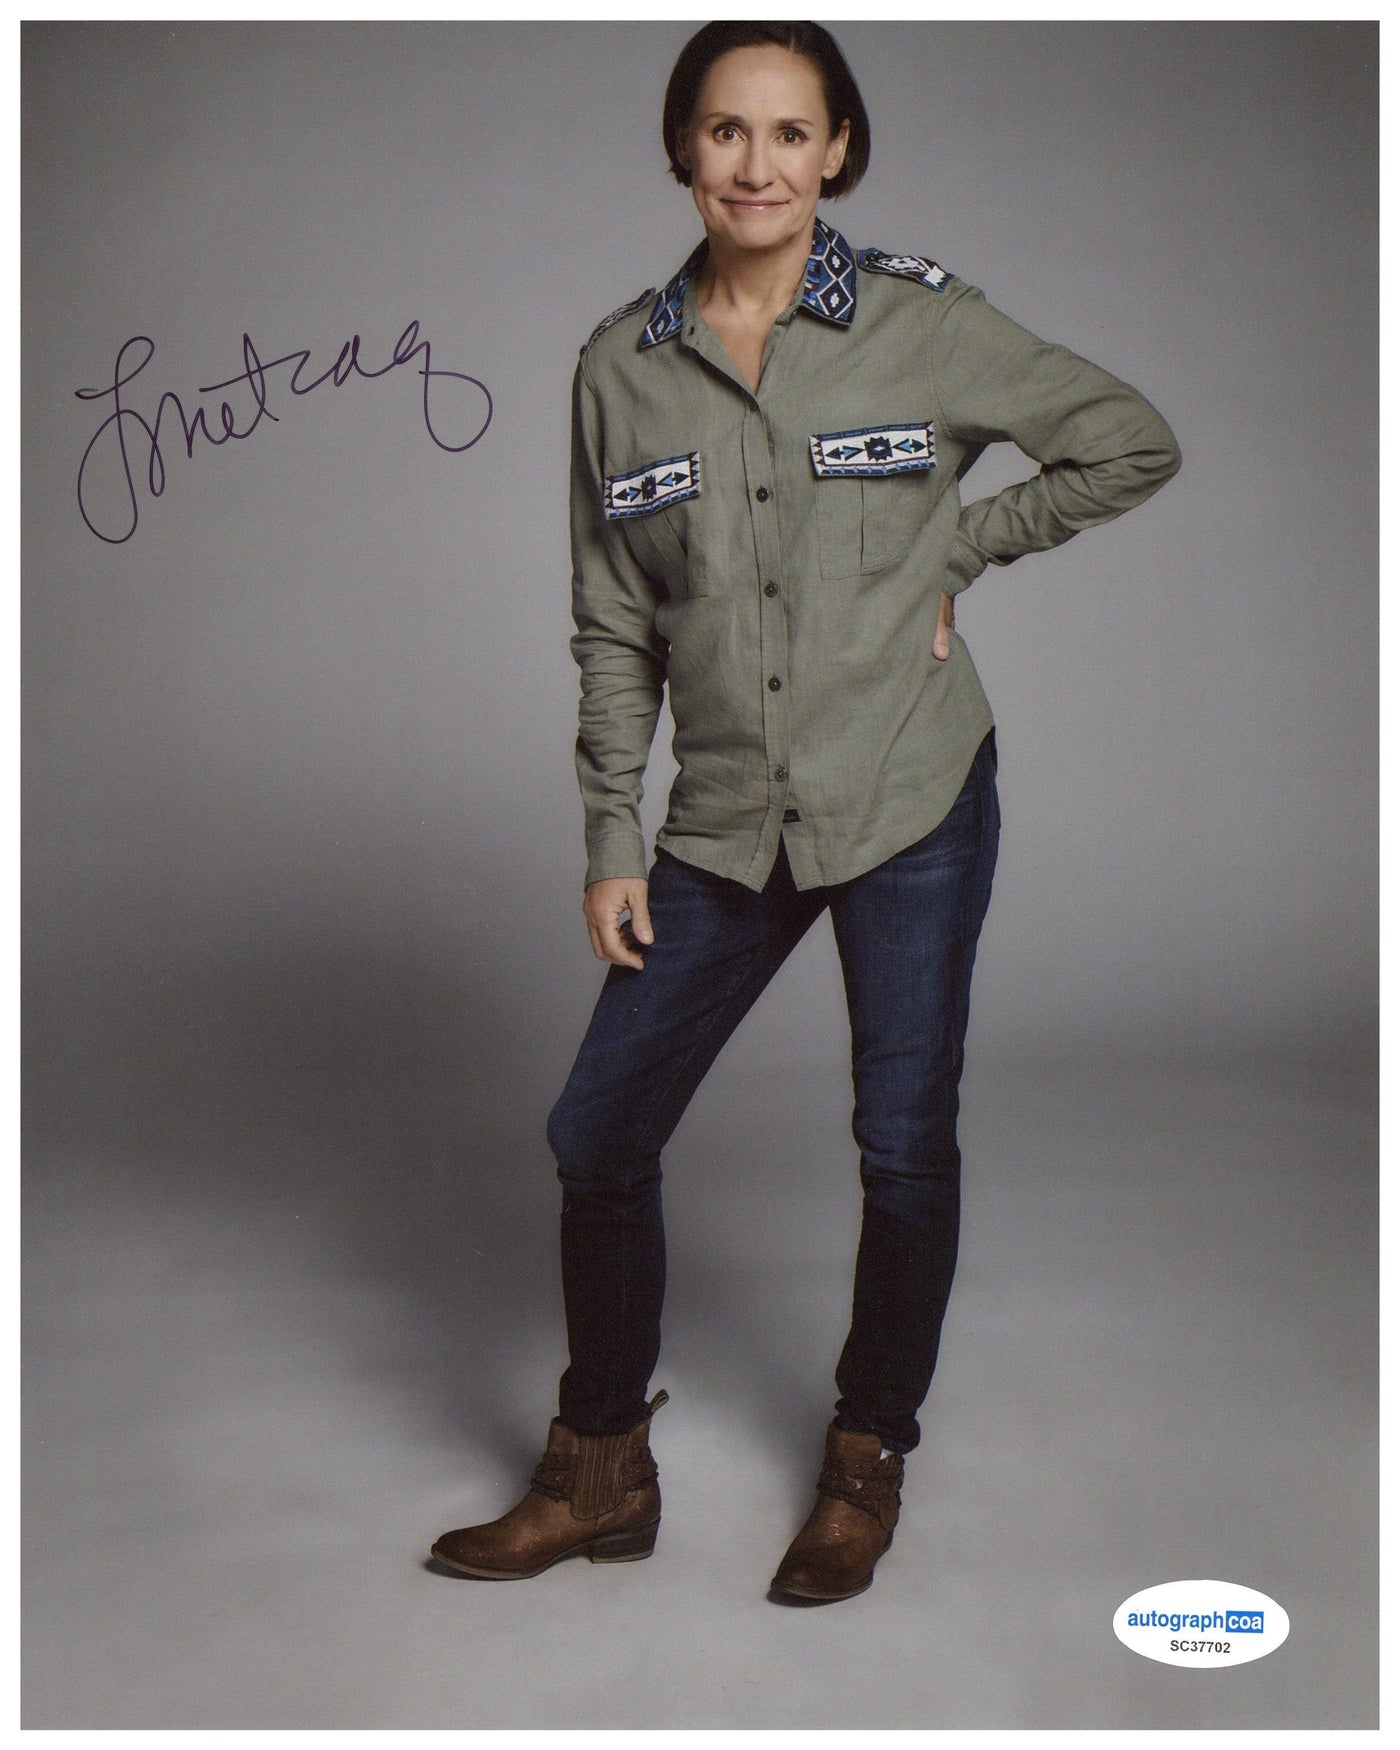 Laurie Metcalf Autographed 8x10 Photo Roseanne Jackie Harris Signed ACOA